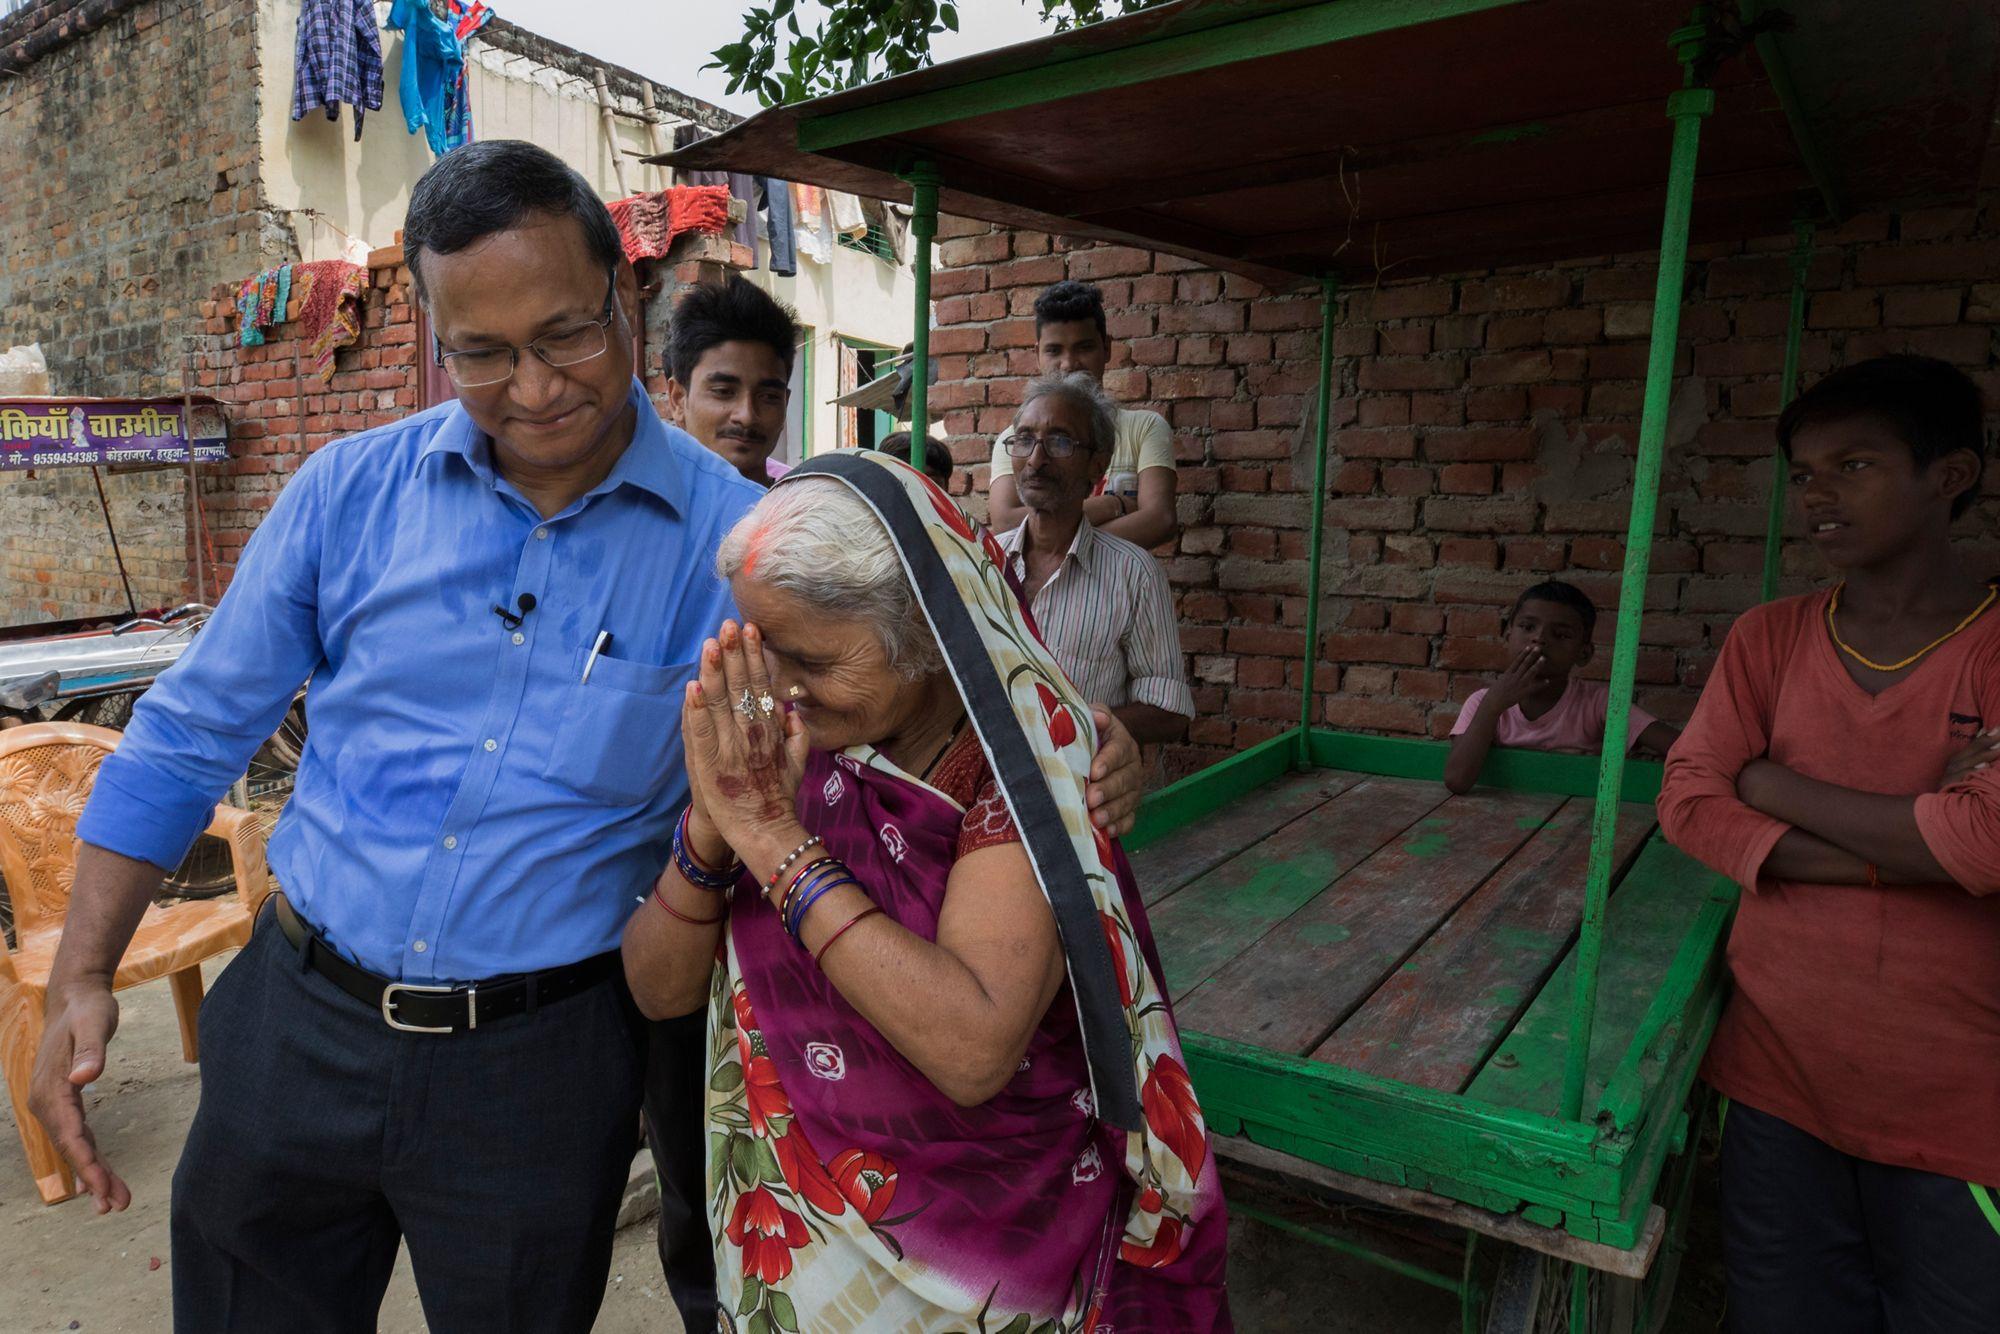 Govind Singh (left), chief executive officer of Utkarsh Small Finance Bank, greets Irawati Devi and her family at their home in Harhua Village, on September 20, 2018. Irawati is small-business owner who has taken several microfinance loans from Utkarsh. Photo © Dominic Chavez / International Finance Corporation                      